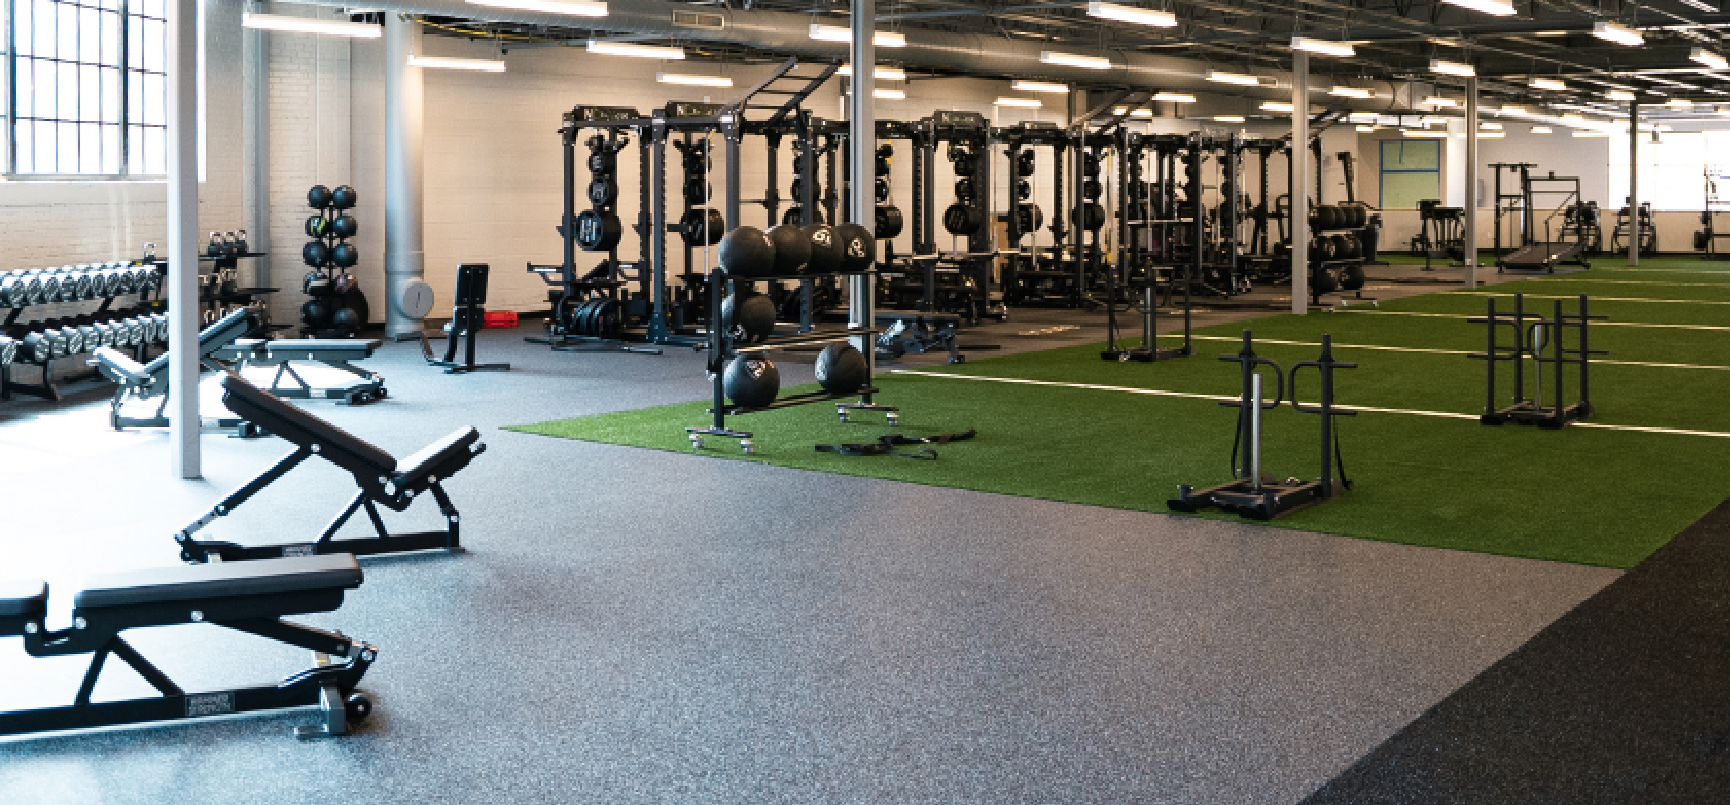 Large, well-equipped gym with varied strength training equipment and a green artificial turf area.